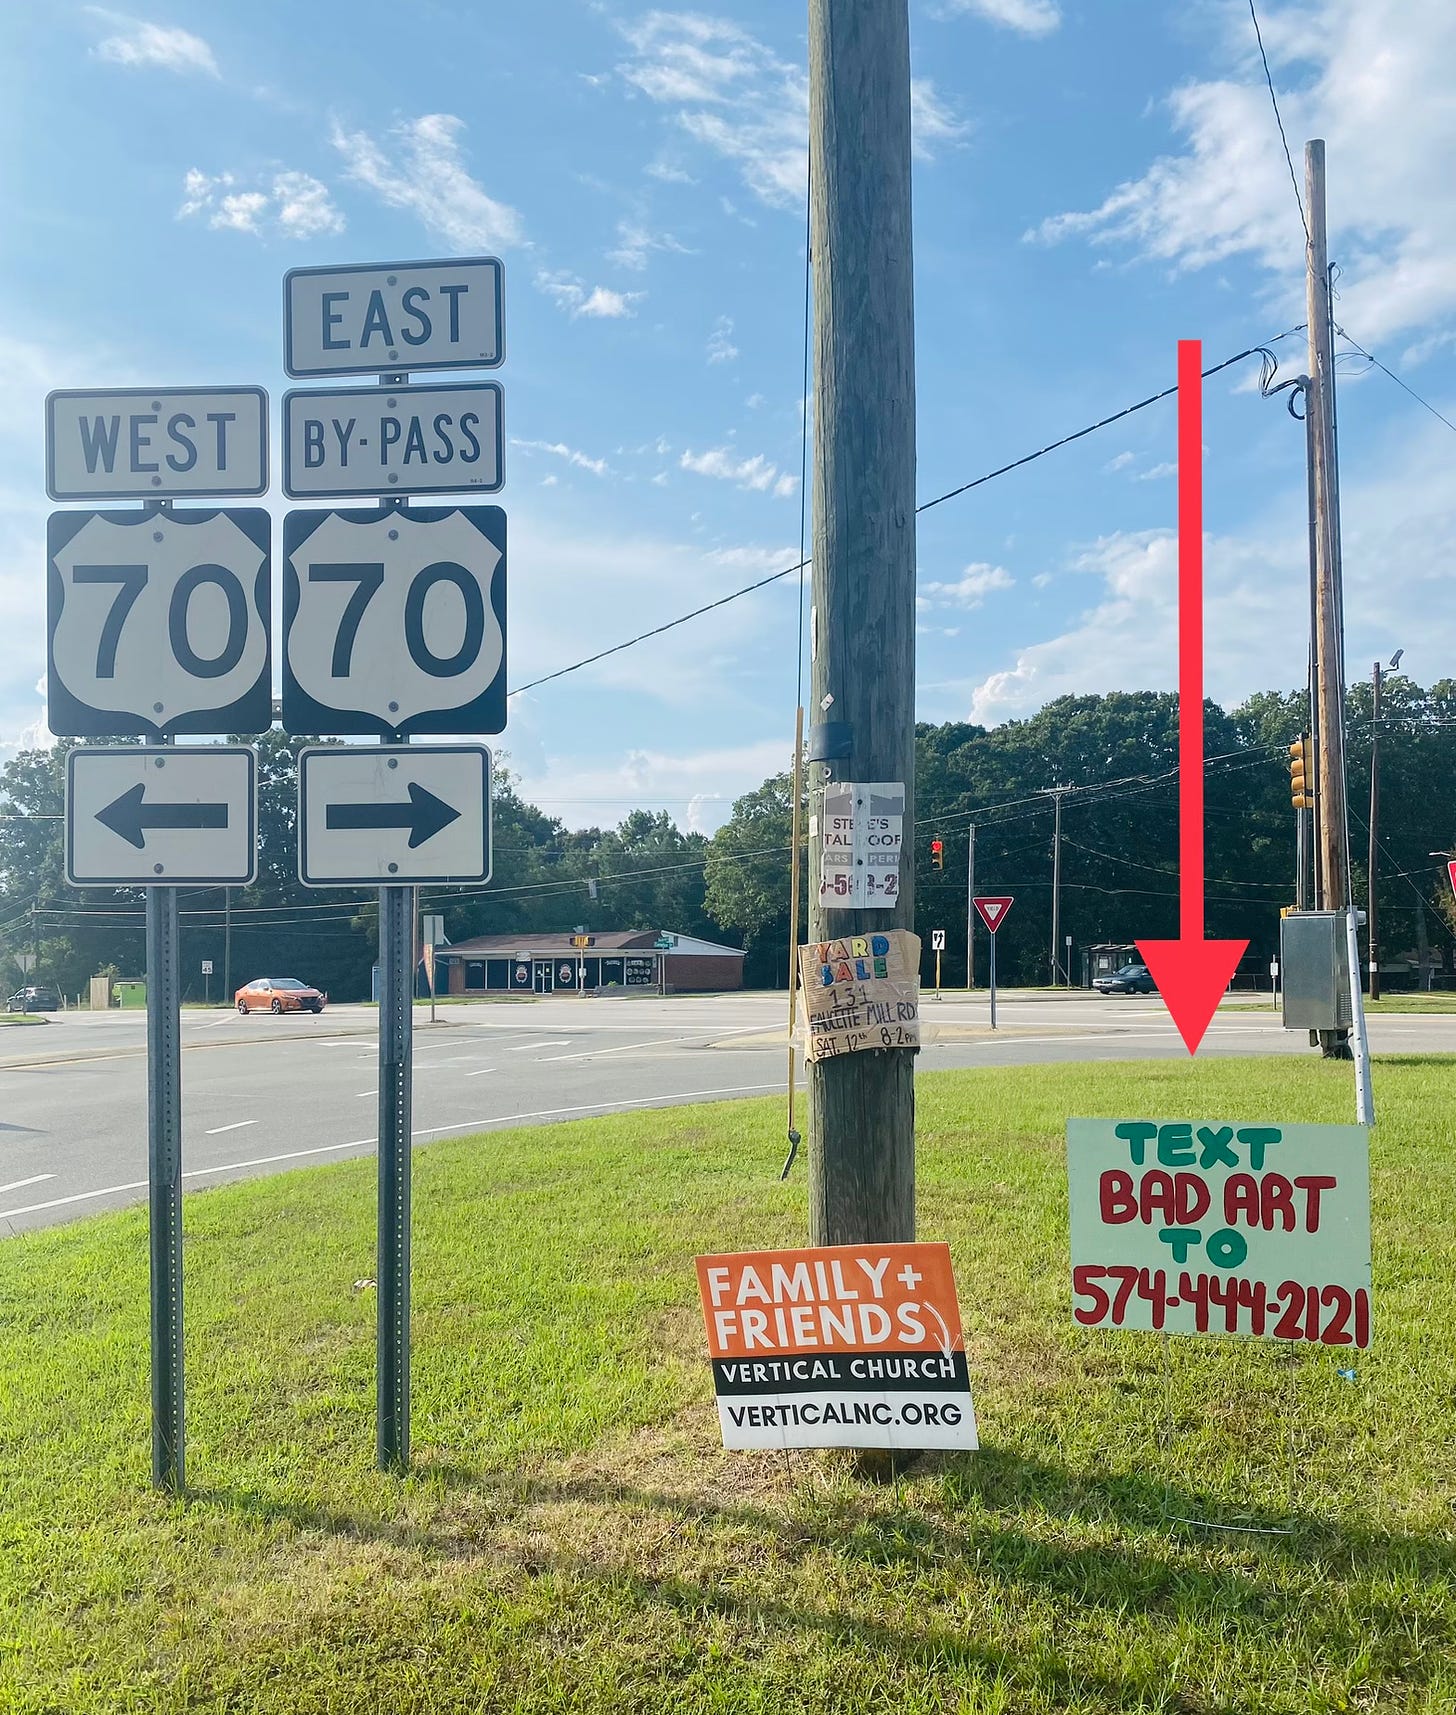 An image of a road sign that reads "Text Bad Art to 574-444-2121" on the side of the road in Hillsborough.